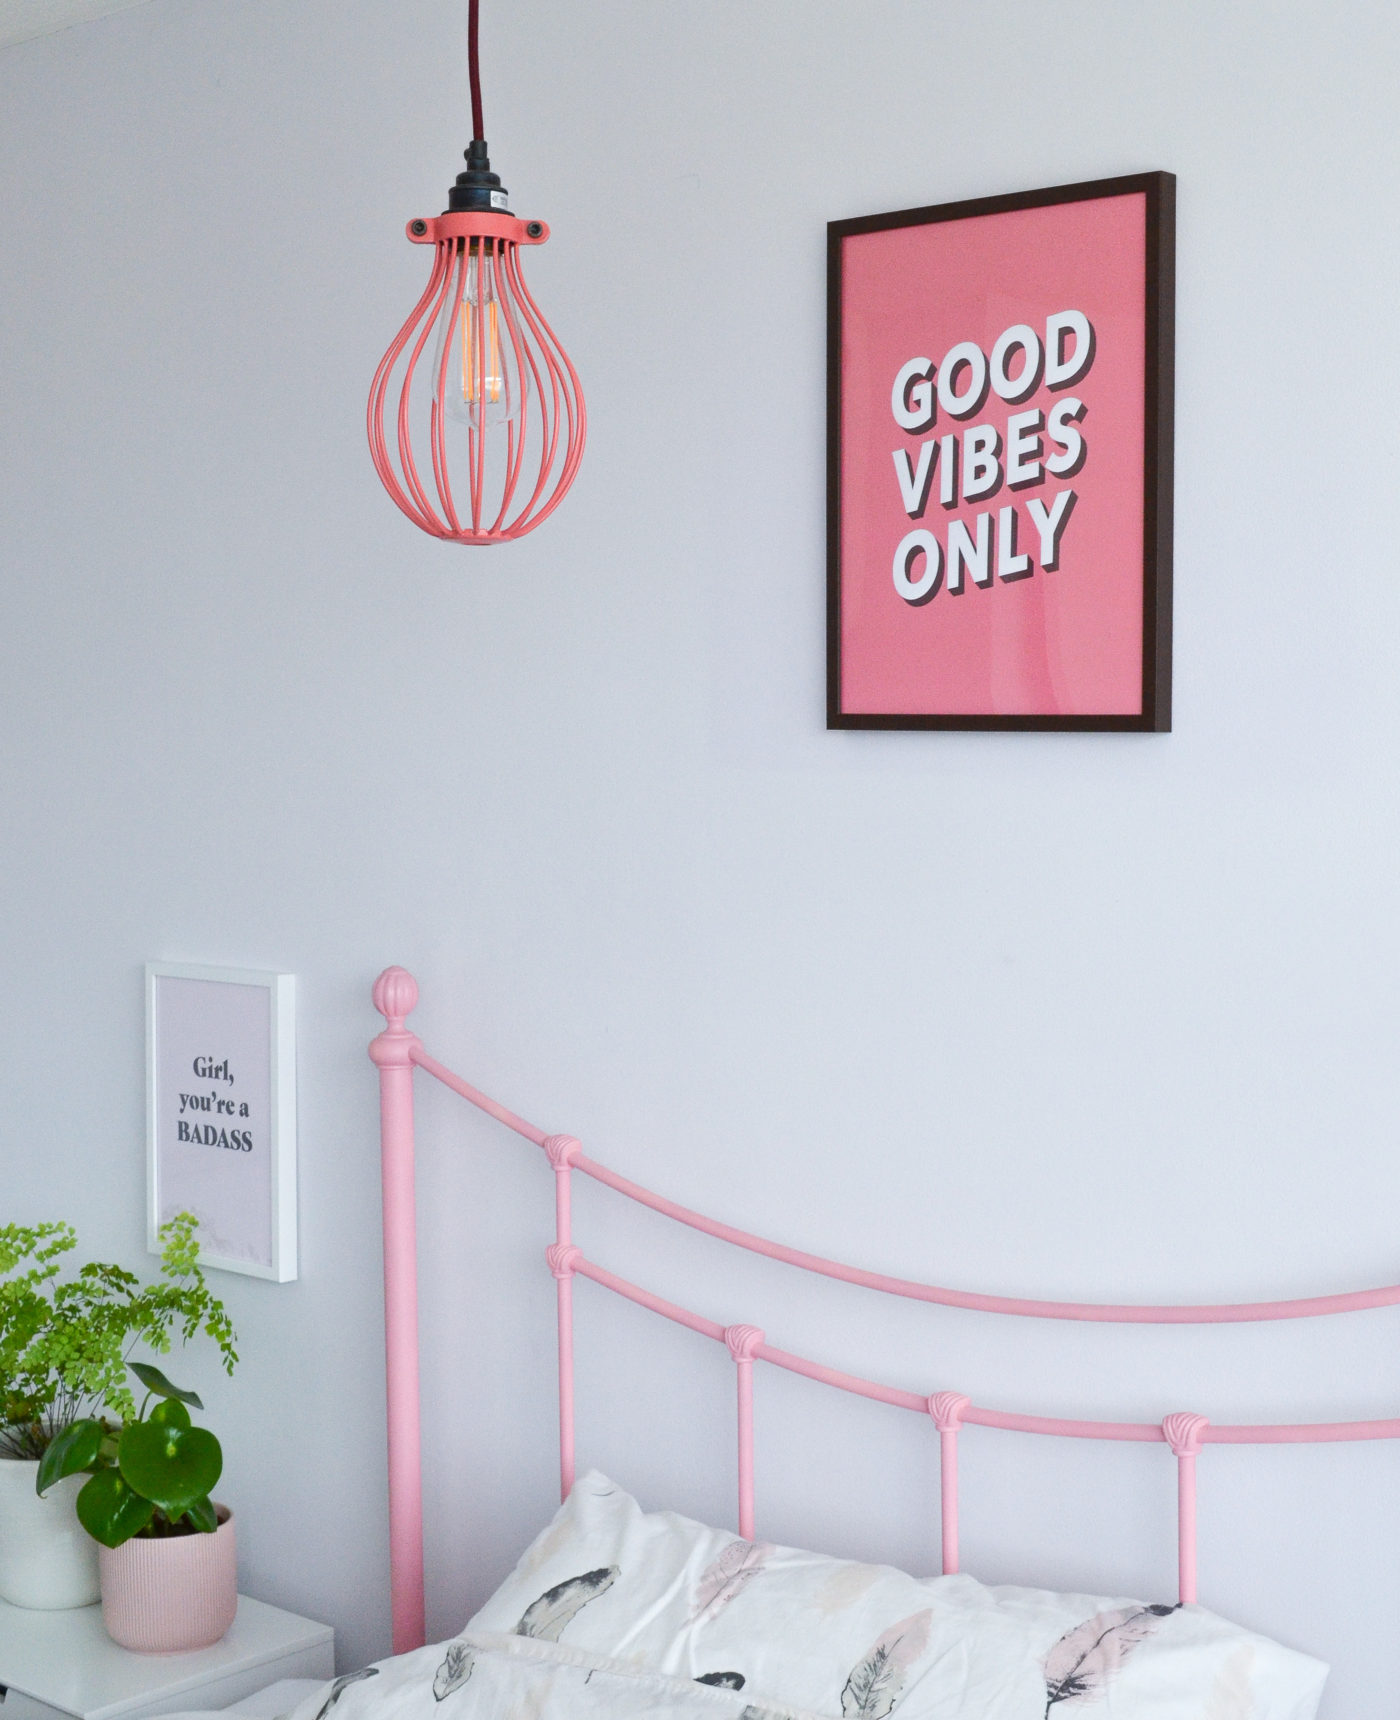 Good Vibes Only print